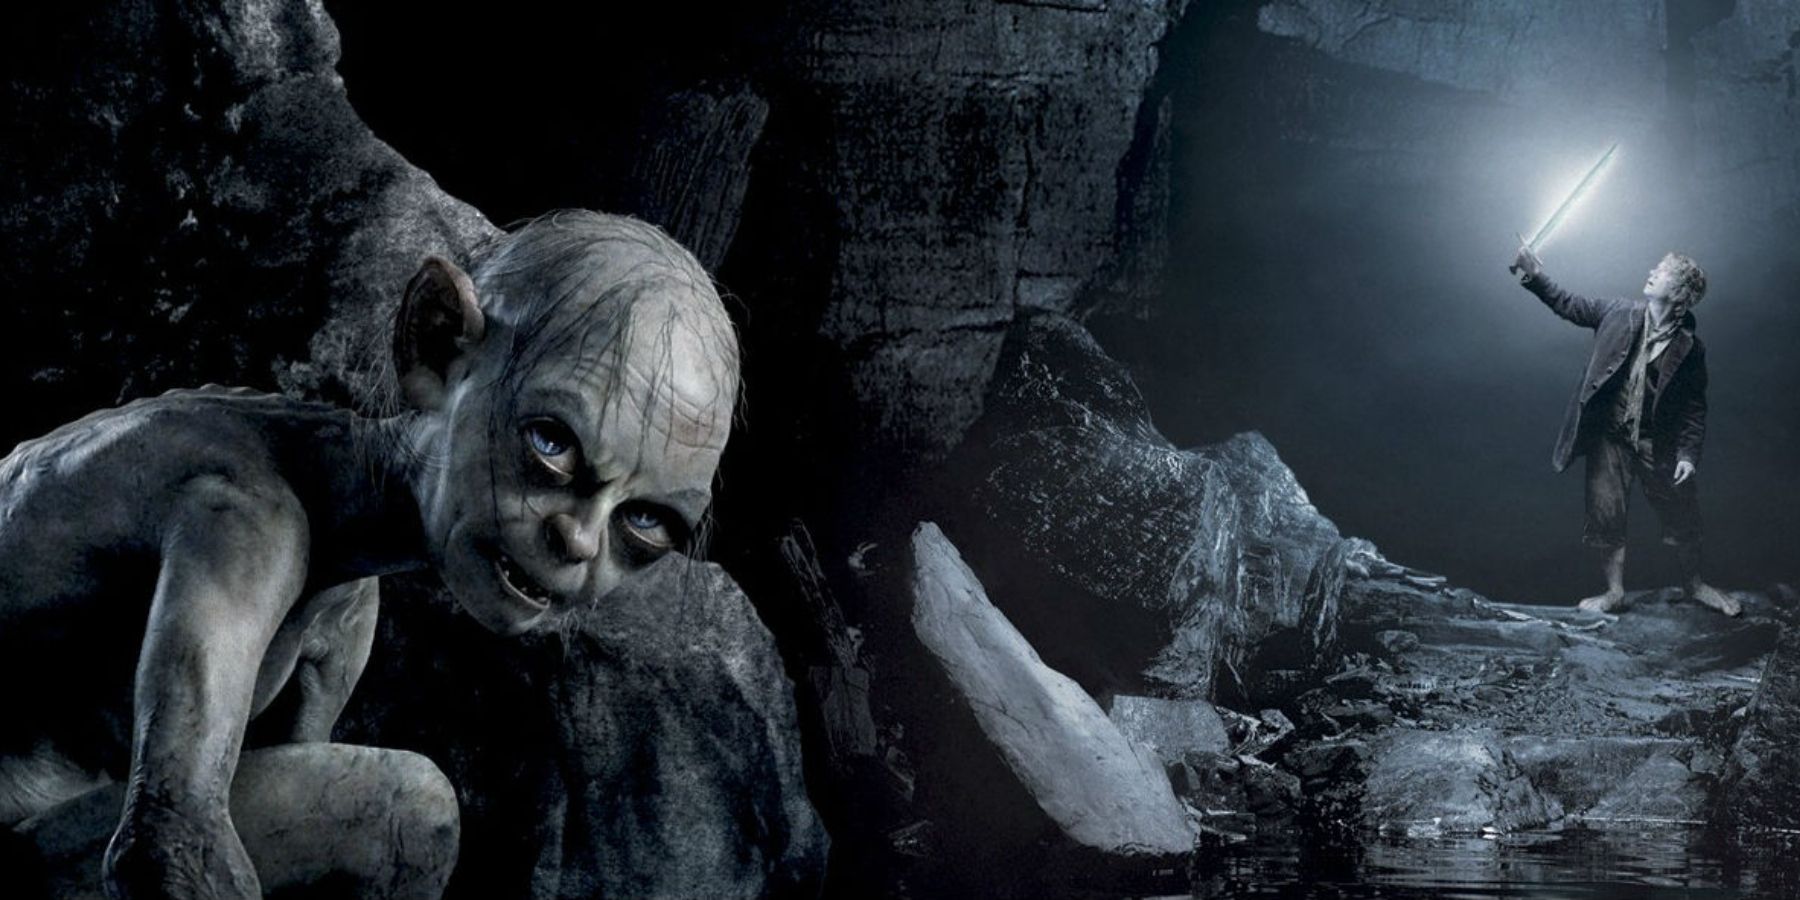 The Lord of the Rings: Gollum - Tolkien Gateway